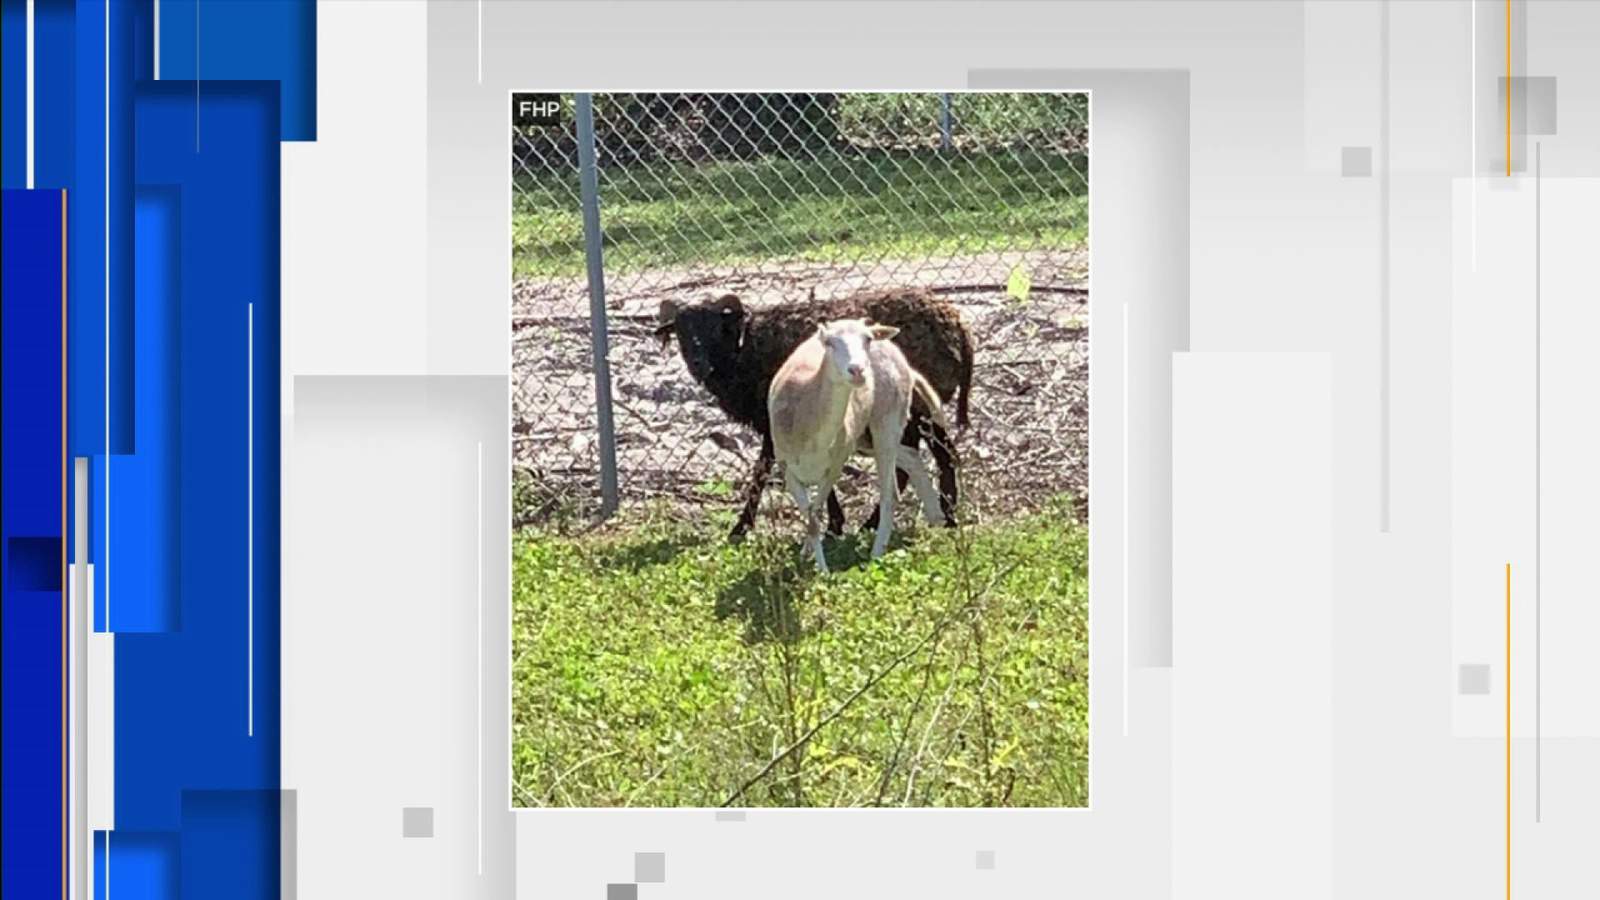 There’s a runaway goat in Tampa — no, it’s not Tom Brady